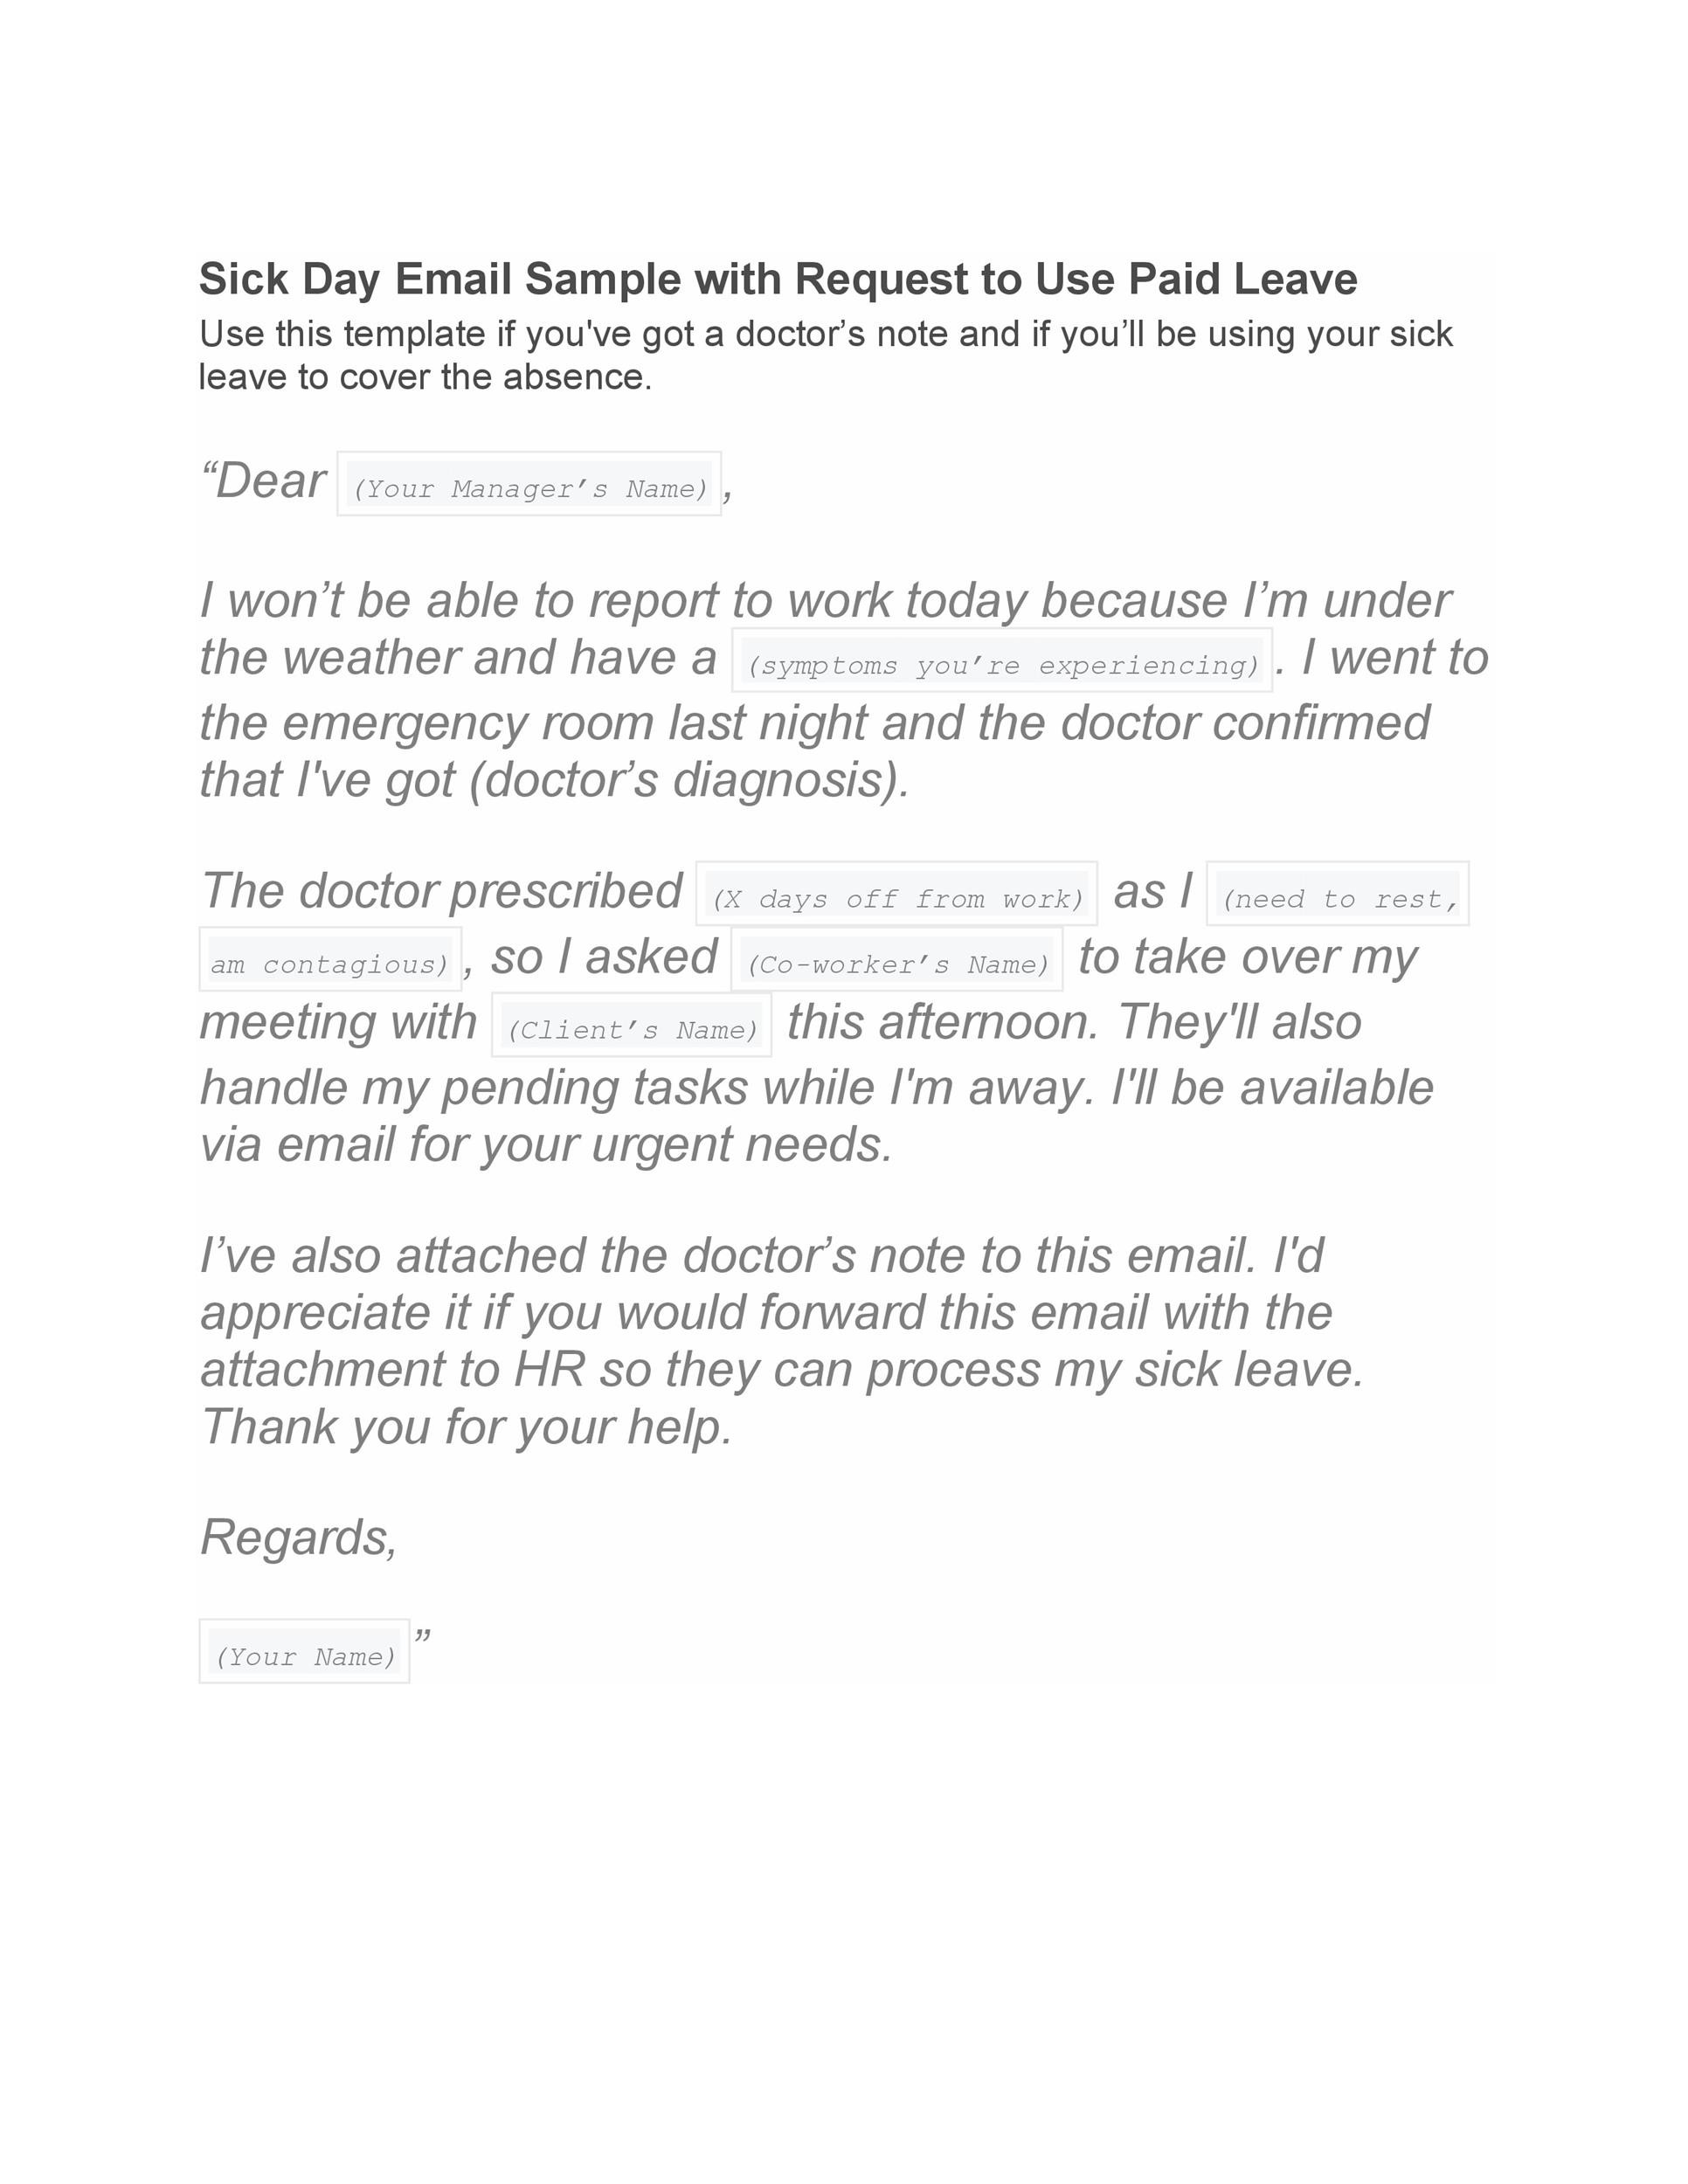 26 Professional Sick Leave Email Templates ᐅ TemplateLab